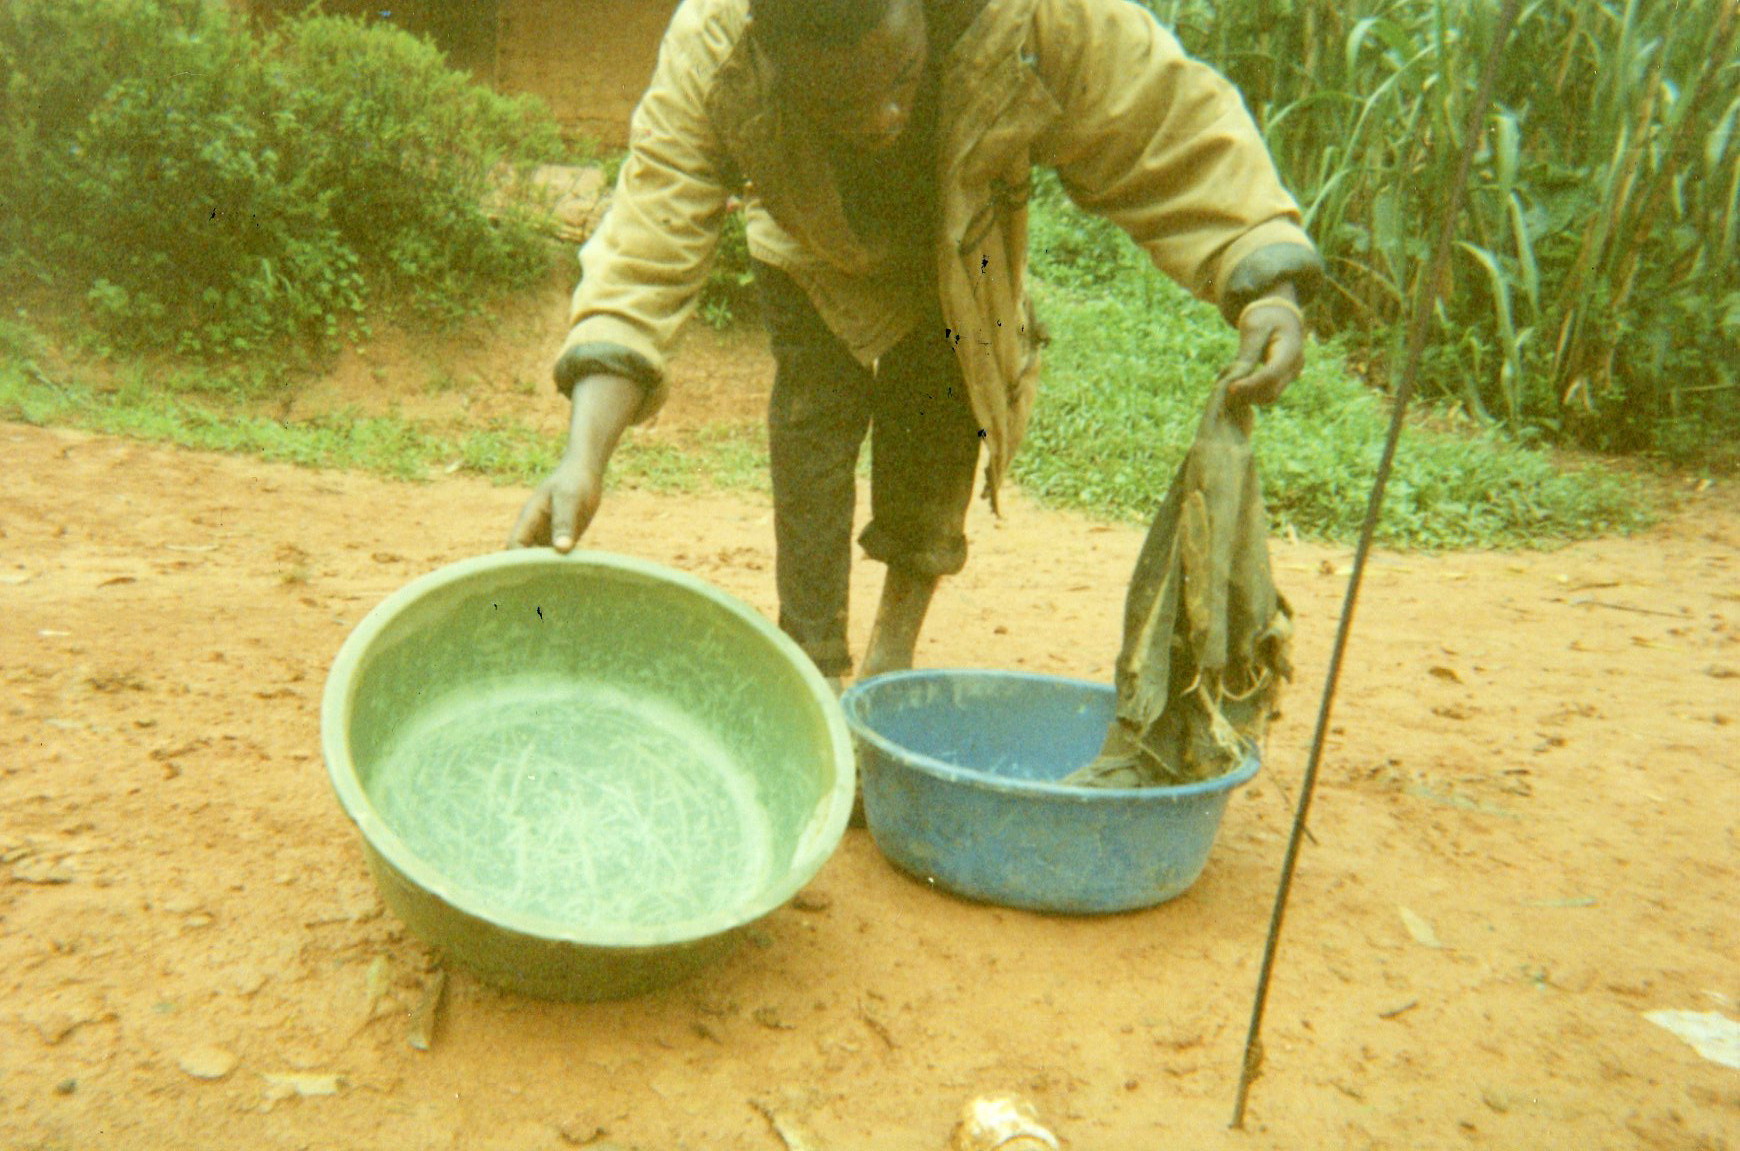  It
is not good for the ex-combatants to rely on artisanal mining of gold as their
main activity. 






  
  
   Normal.dotm 
   0 
   0 
   1 
   14 
   80 
   Harvard College 
   1 
   1 
   98 
   12.0 
  
  
   
  
    
  
   0 
   false 
   
  